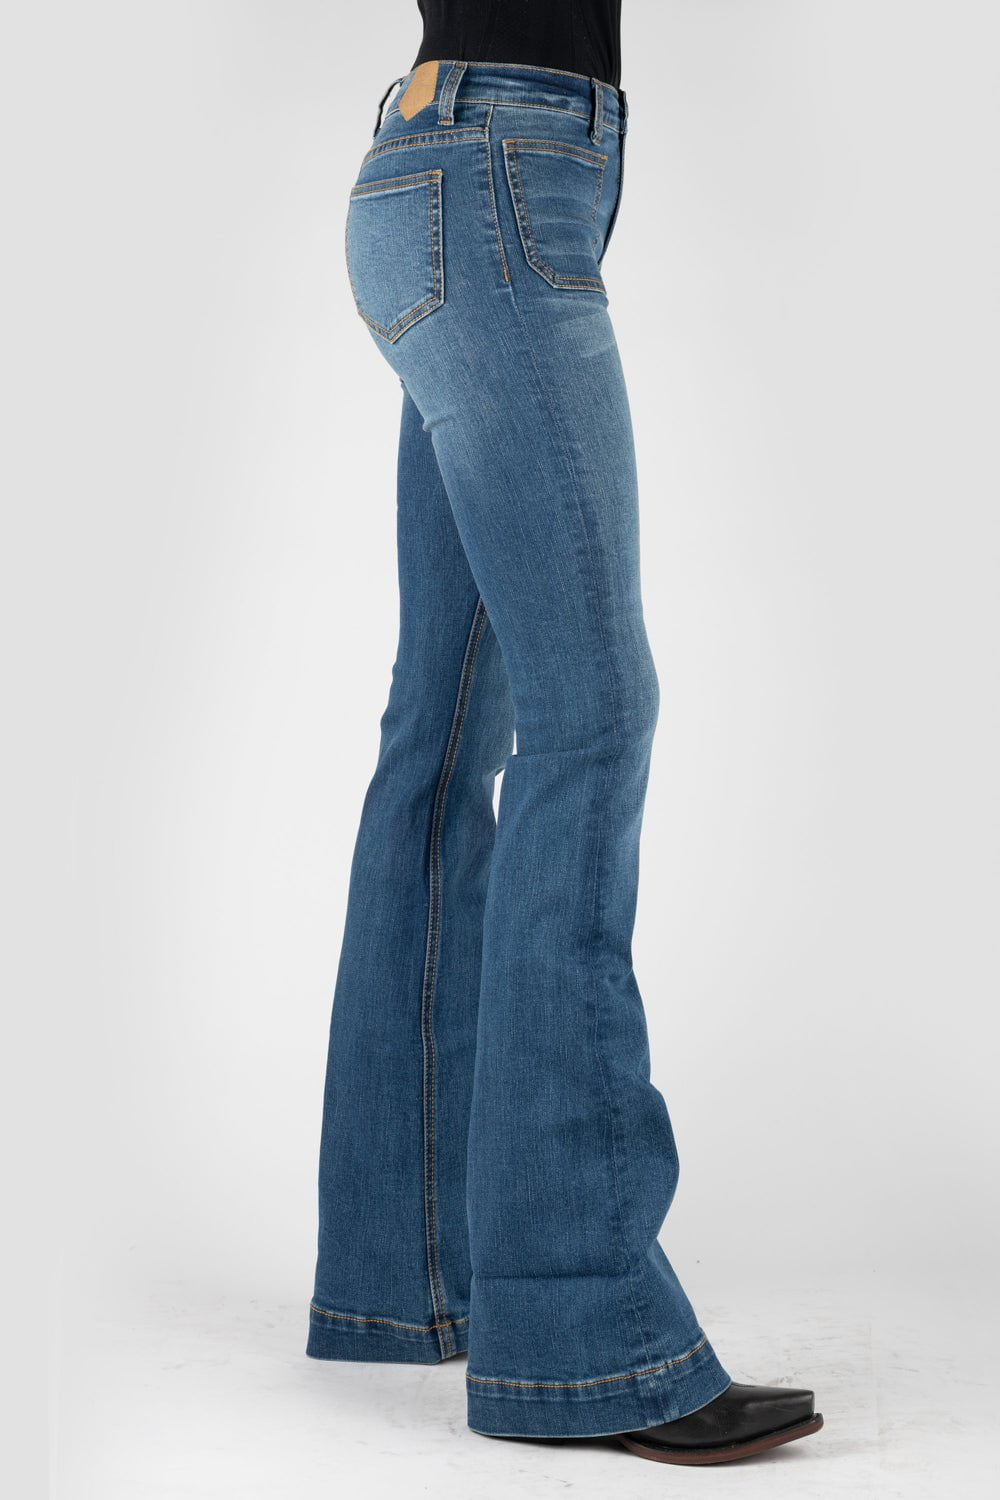 Tin Haul Womens Blue Cotton Blend Libby Fit Square Pocket Jeans – The  Western Company